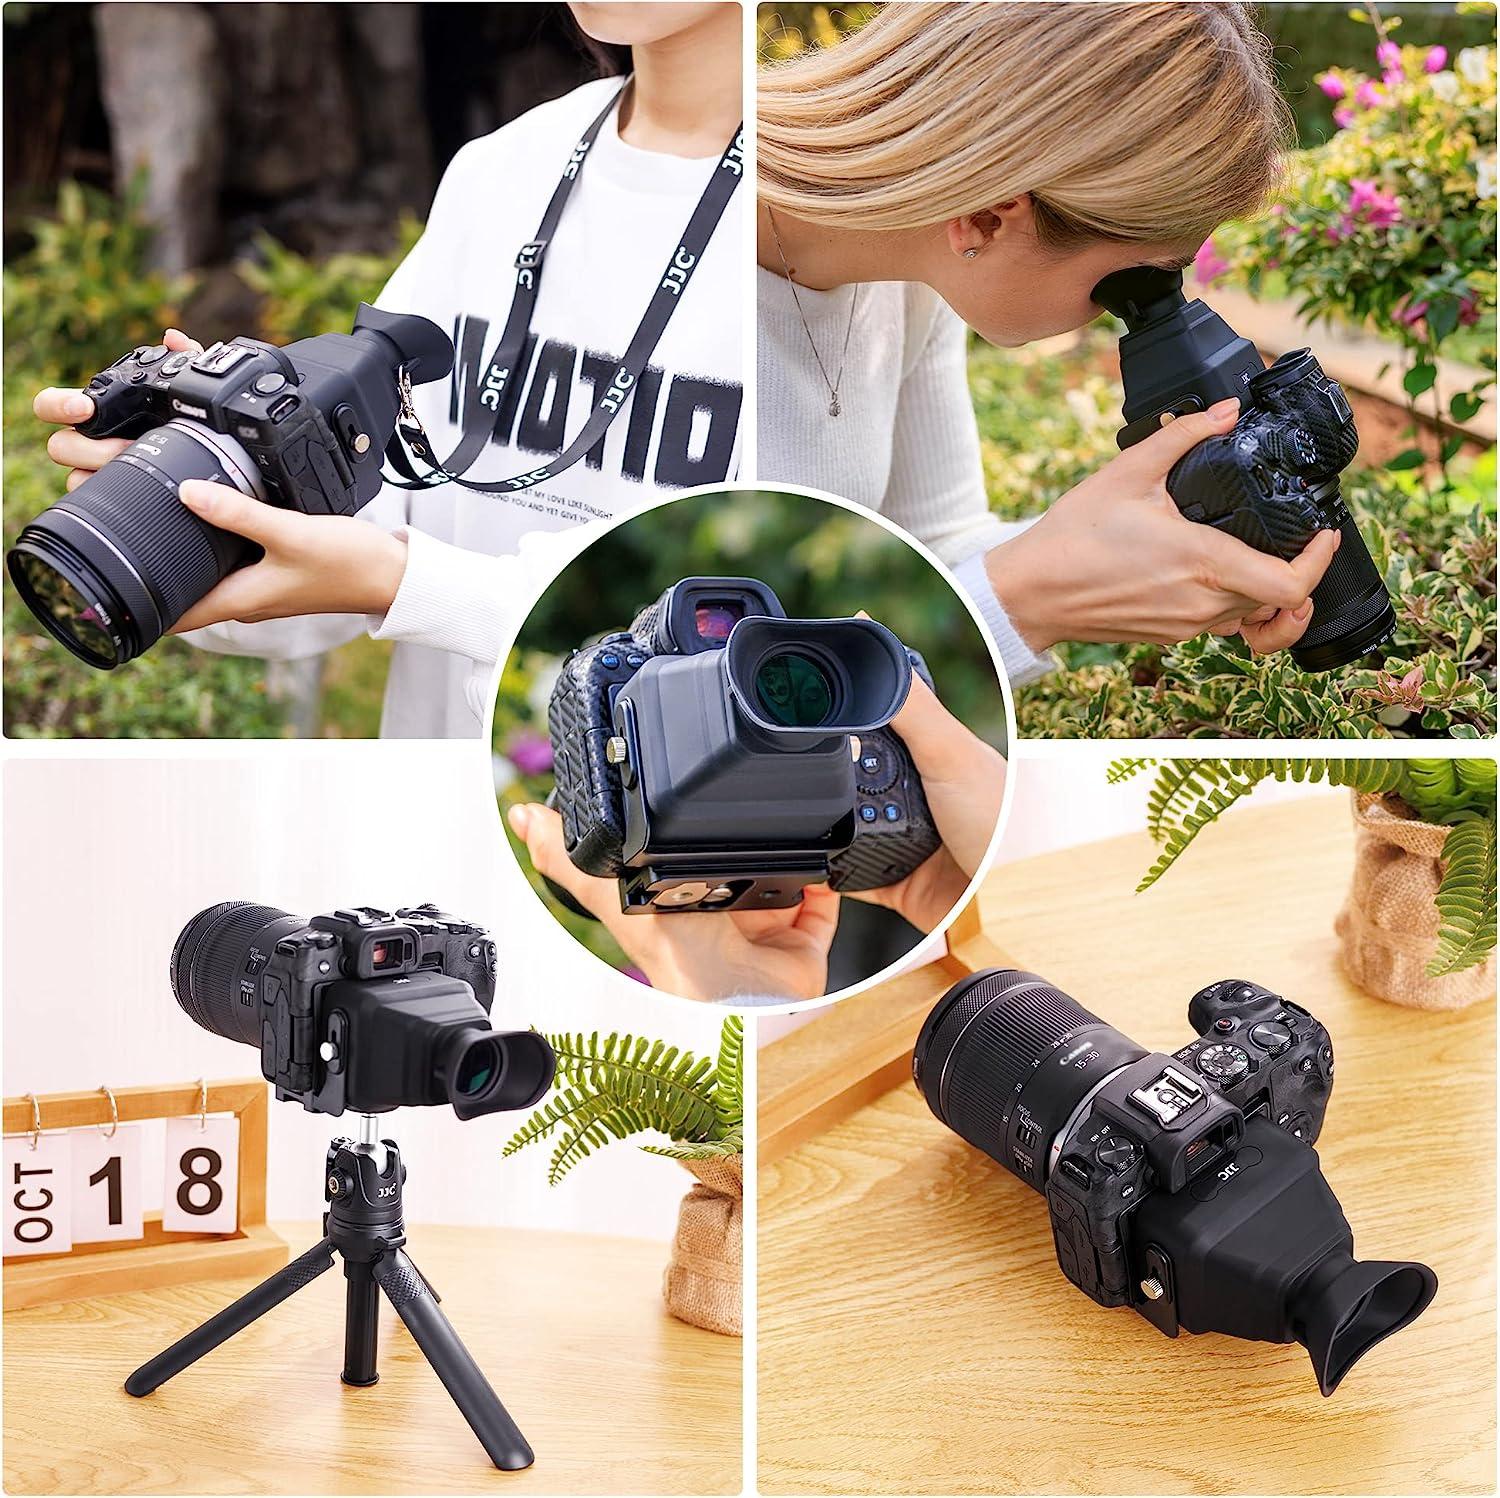 JJC Collapsible Camera LCD Viewfinder, 3X Screen Magnifier